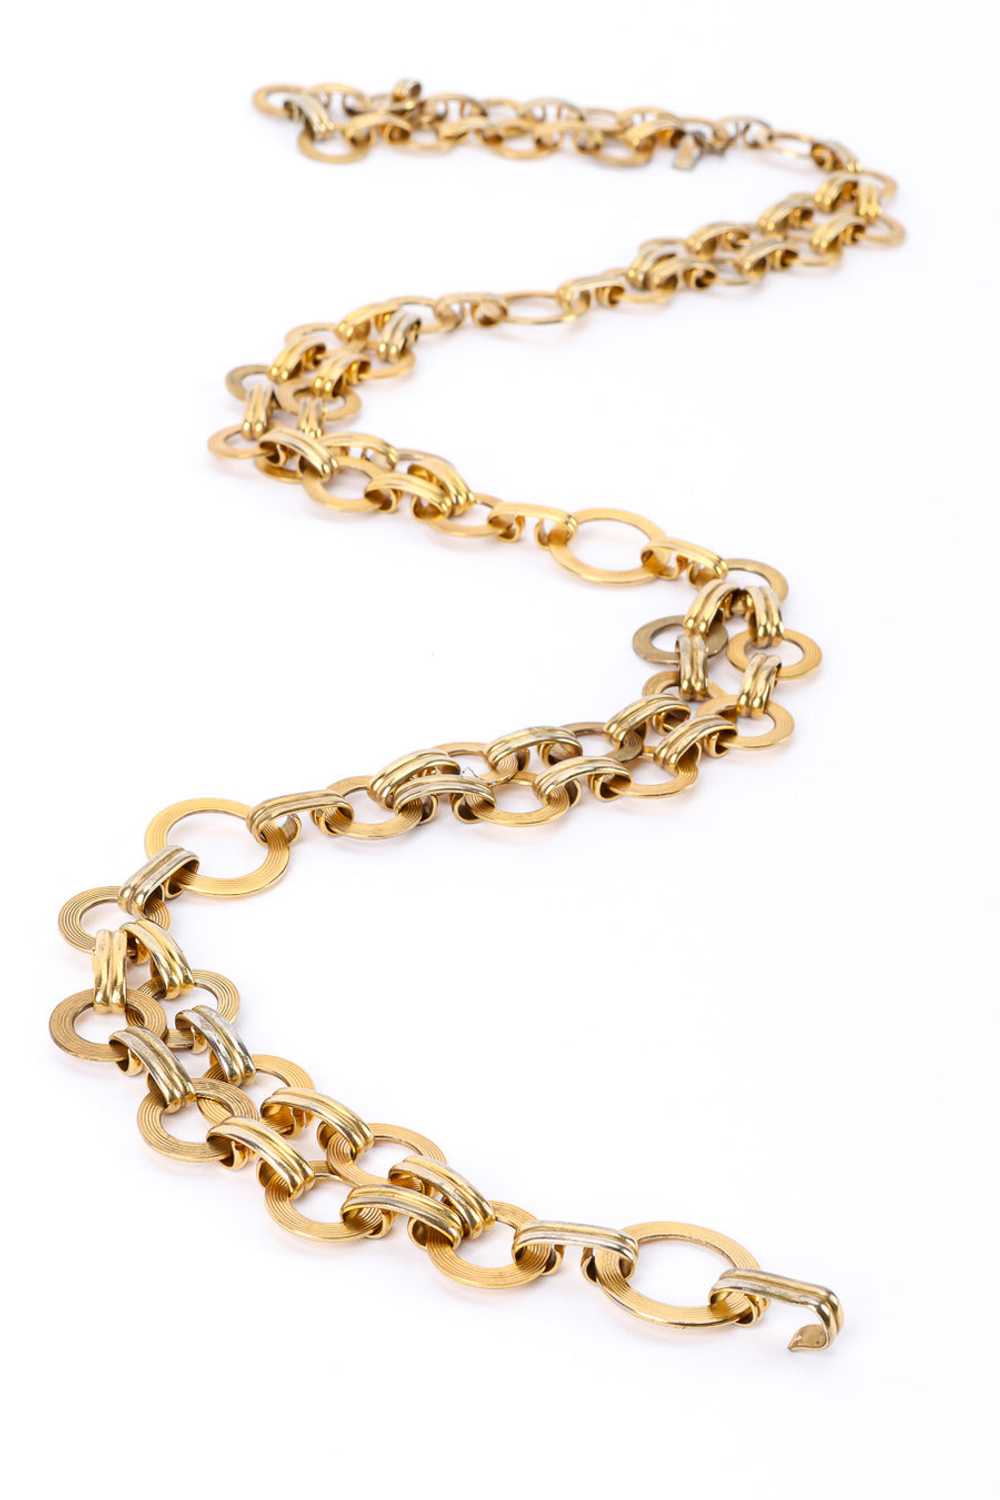 YSL Double Disc Chain Belt - image 3